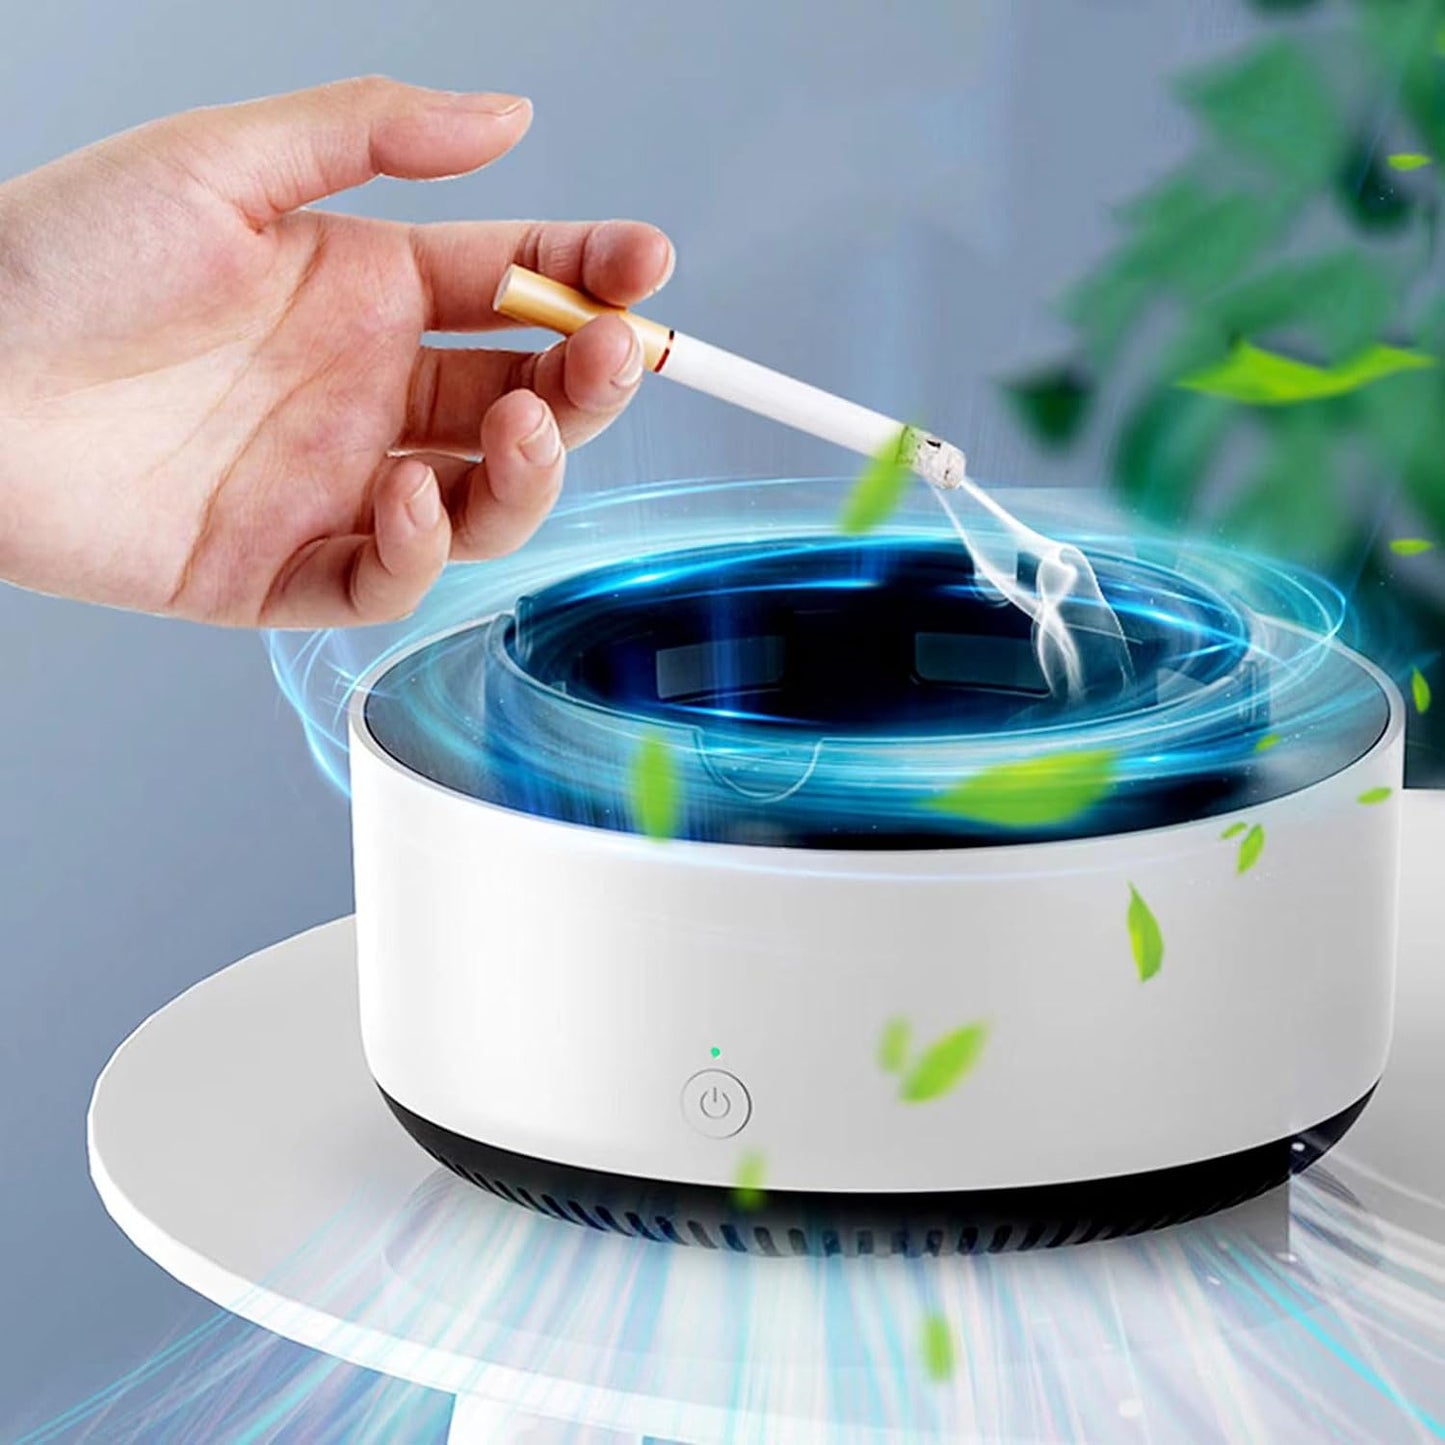 Multi-Purpose Ashtray with Air Purifier